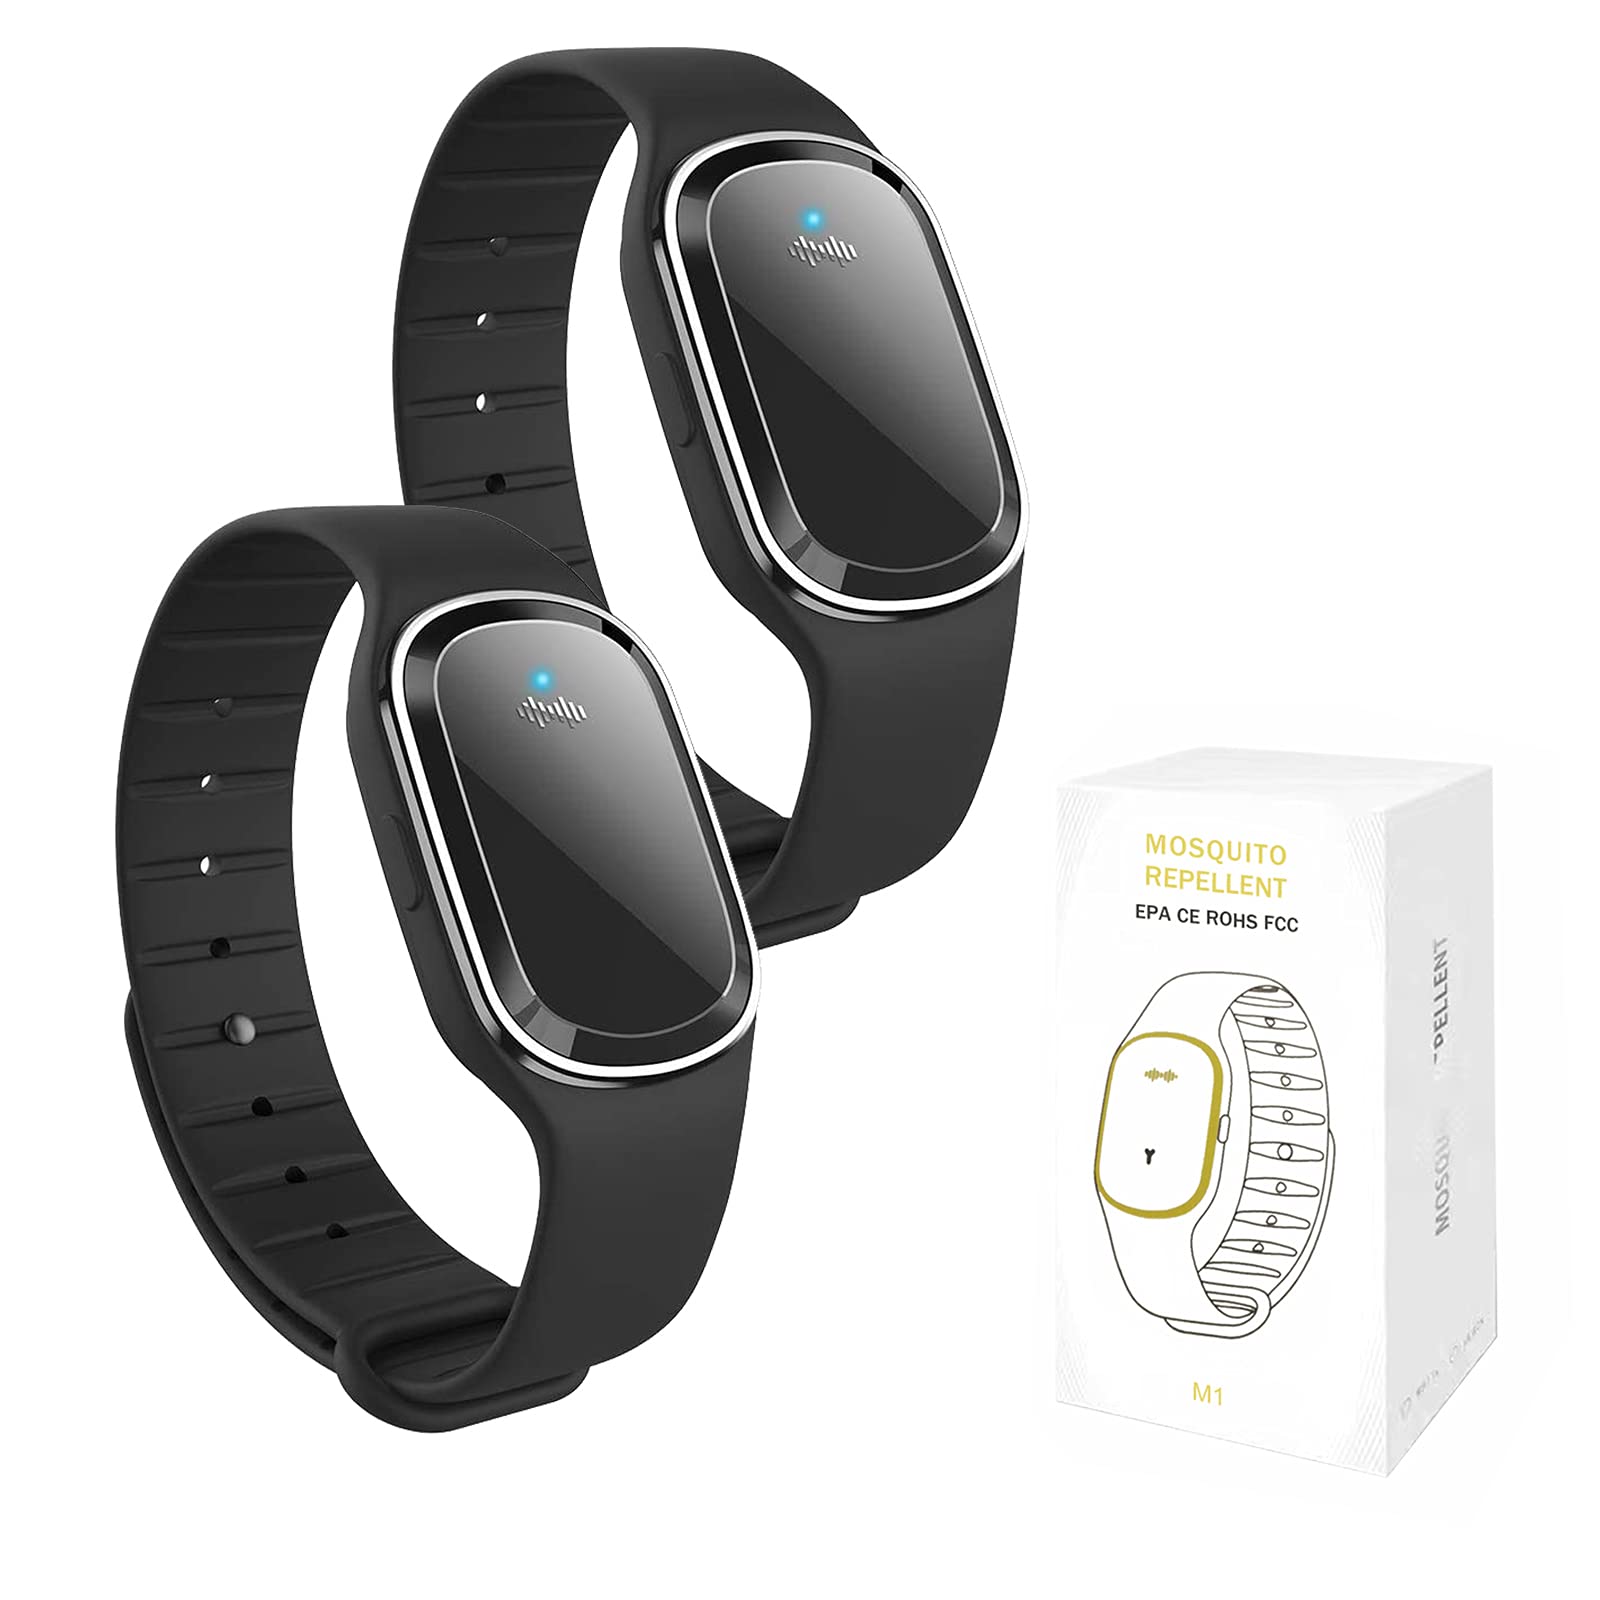 Ultrasonic Mosquito Repellent Bracelet Rechargeable Smart Electronic  Mosquito Repellent Watch Wristband Band for Adult Children with Clock  Function - Walmart.com